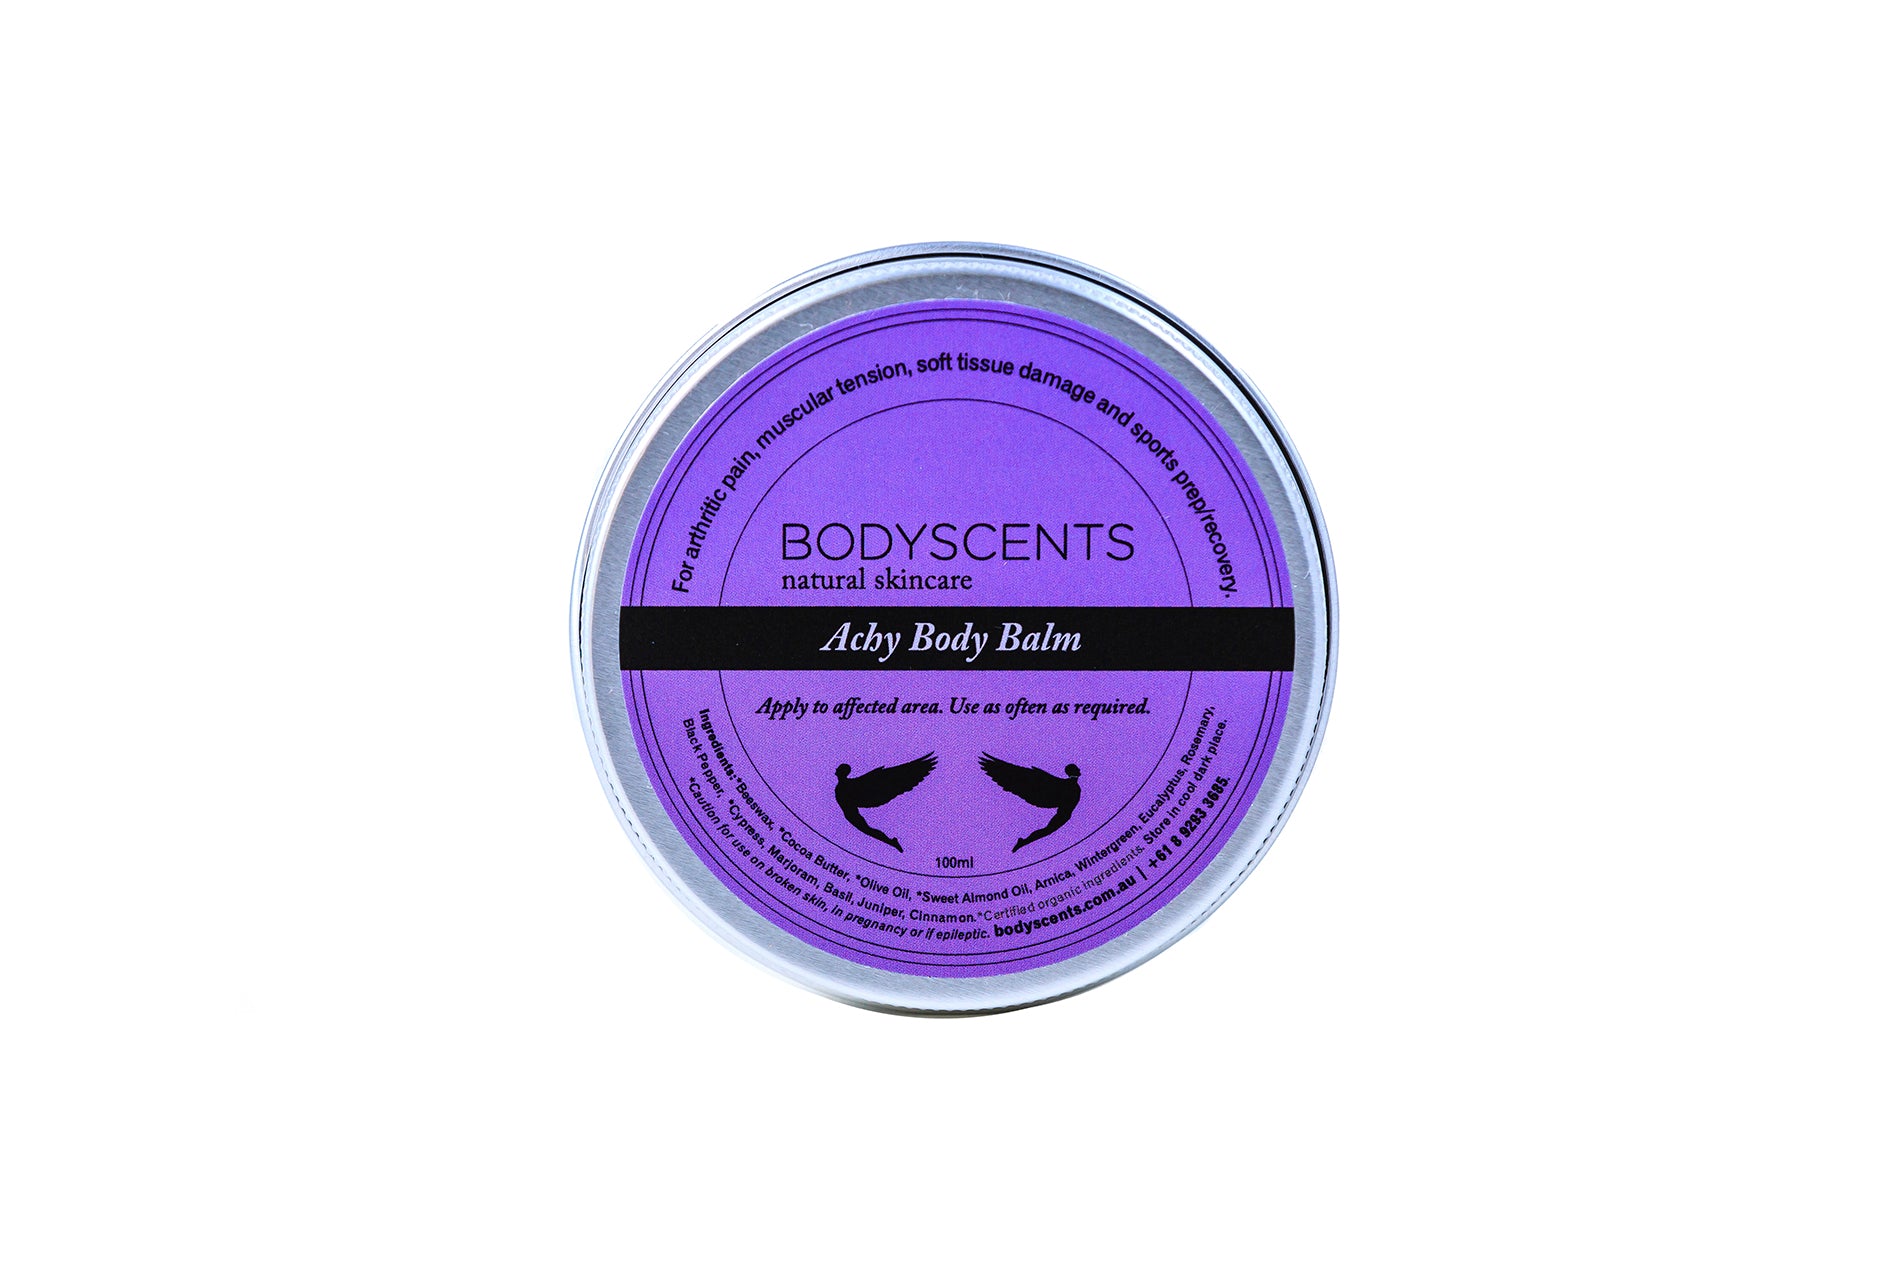 Achy Body Balm - Results in Minutes!